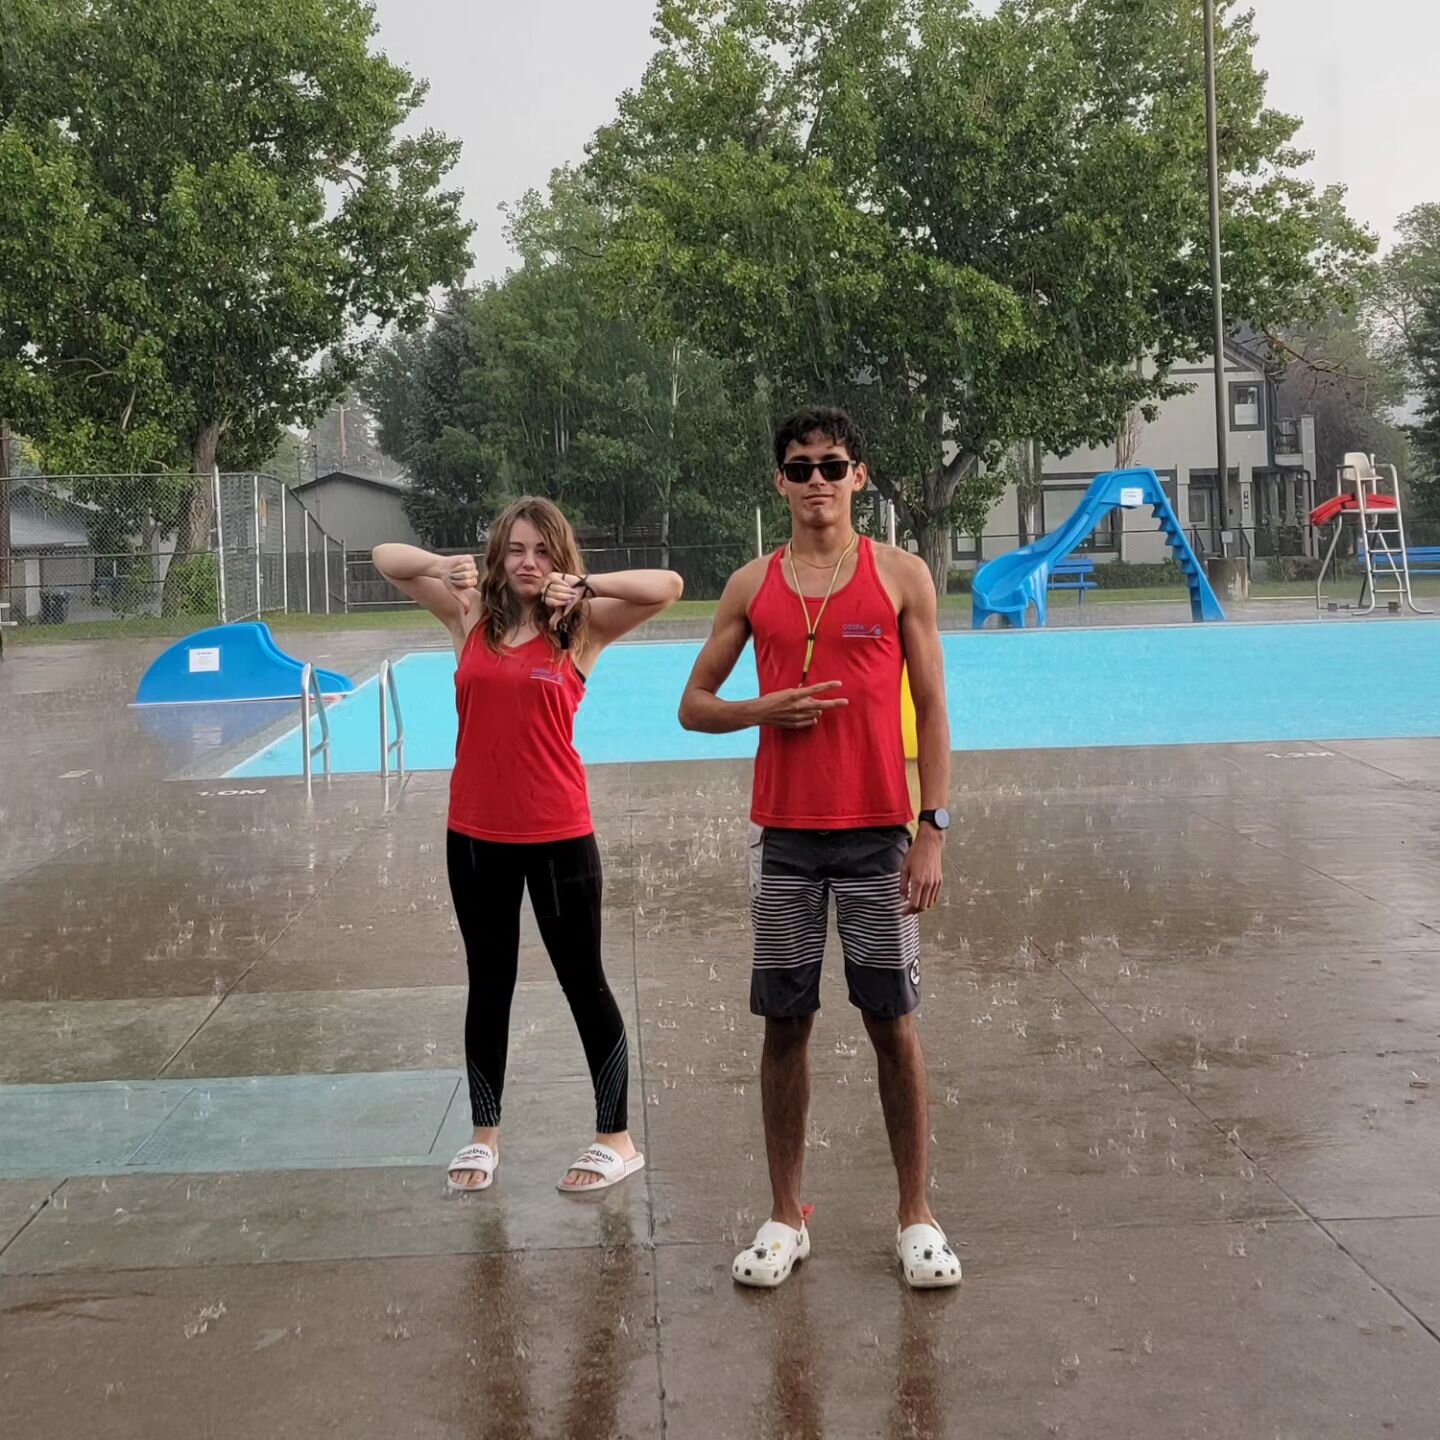 Pool's closed for now due to the big thunderstorm. ☹️ 
#hsca #cospa #severethunderstormwarning #swimming #calgary #outdoorpool